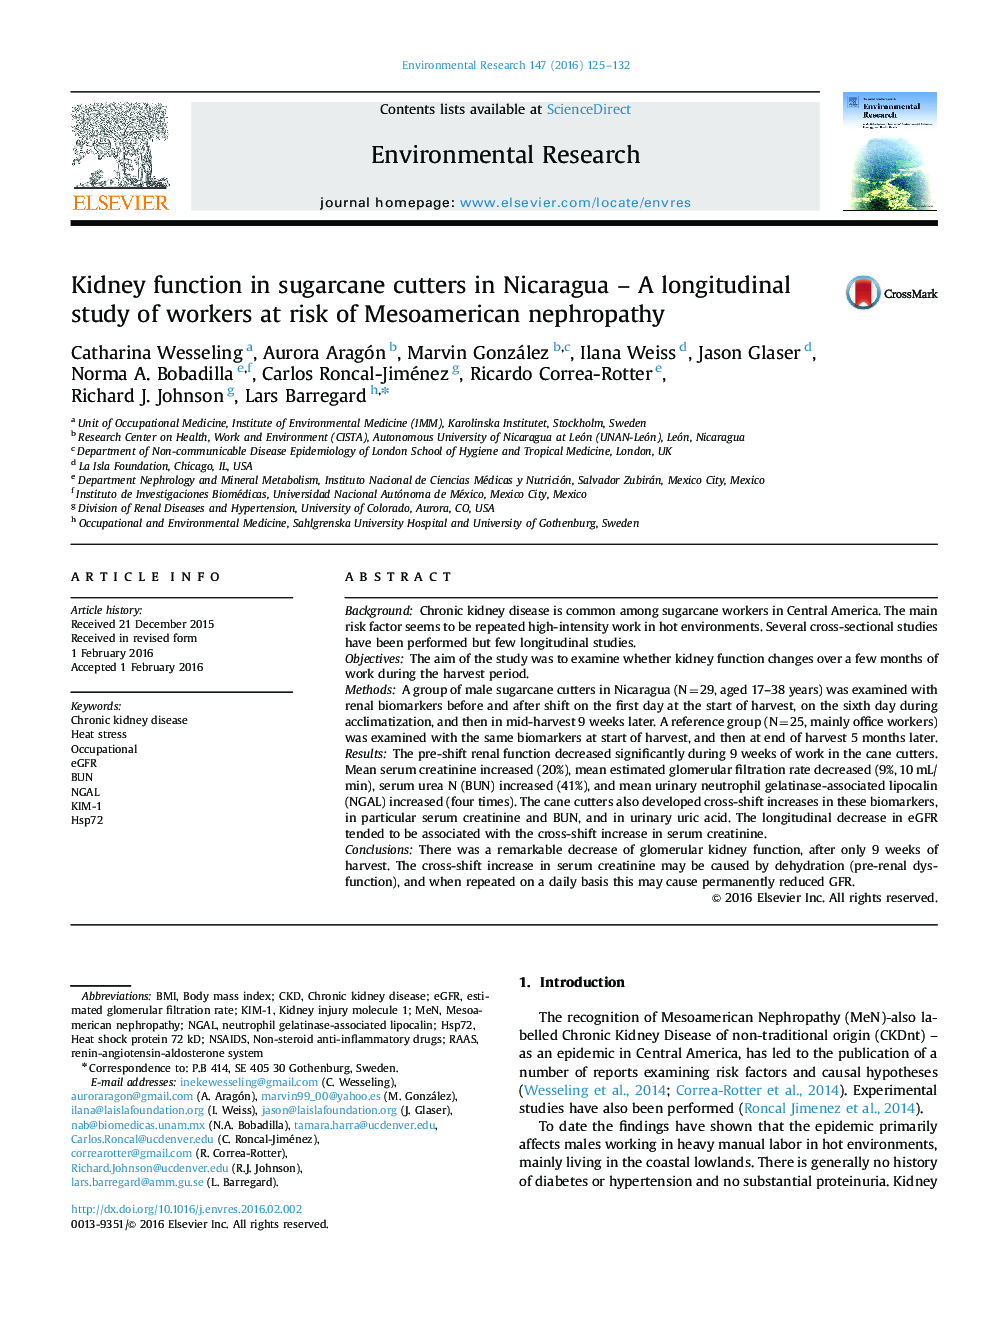 Kidney function in sugarcane cutters in Nicaragua - A longitudinal study of workers at risk of Mesoamerican nephropathy